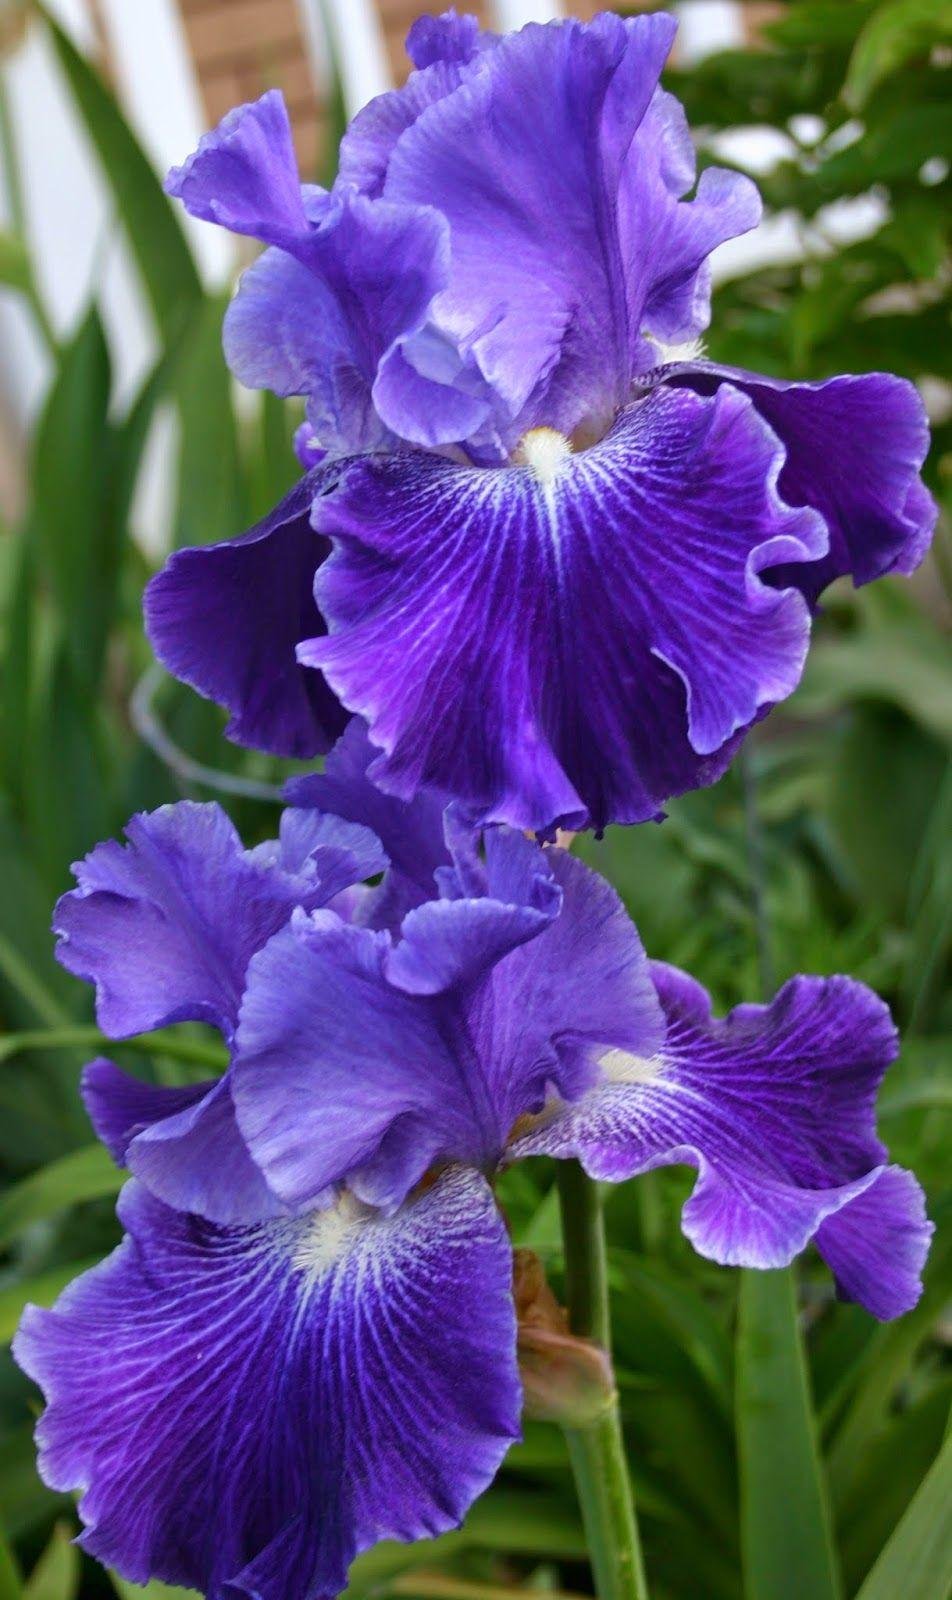 Iris flower: Facts, physical features, growth, maintenance, toxicity, and uses 1